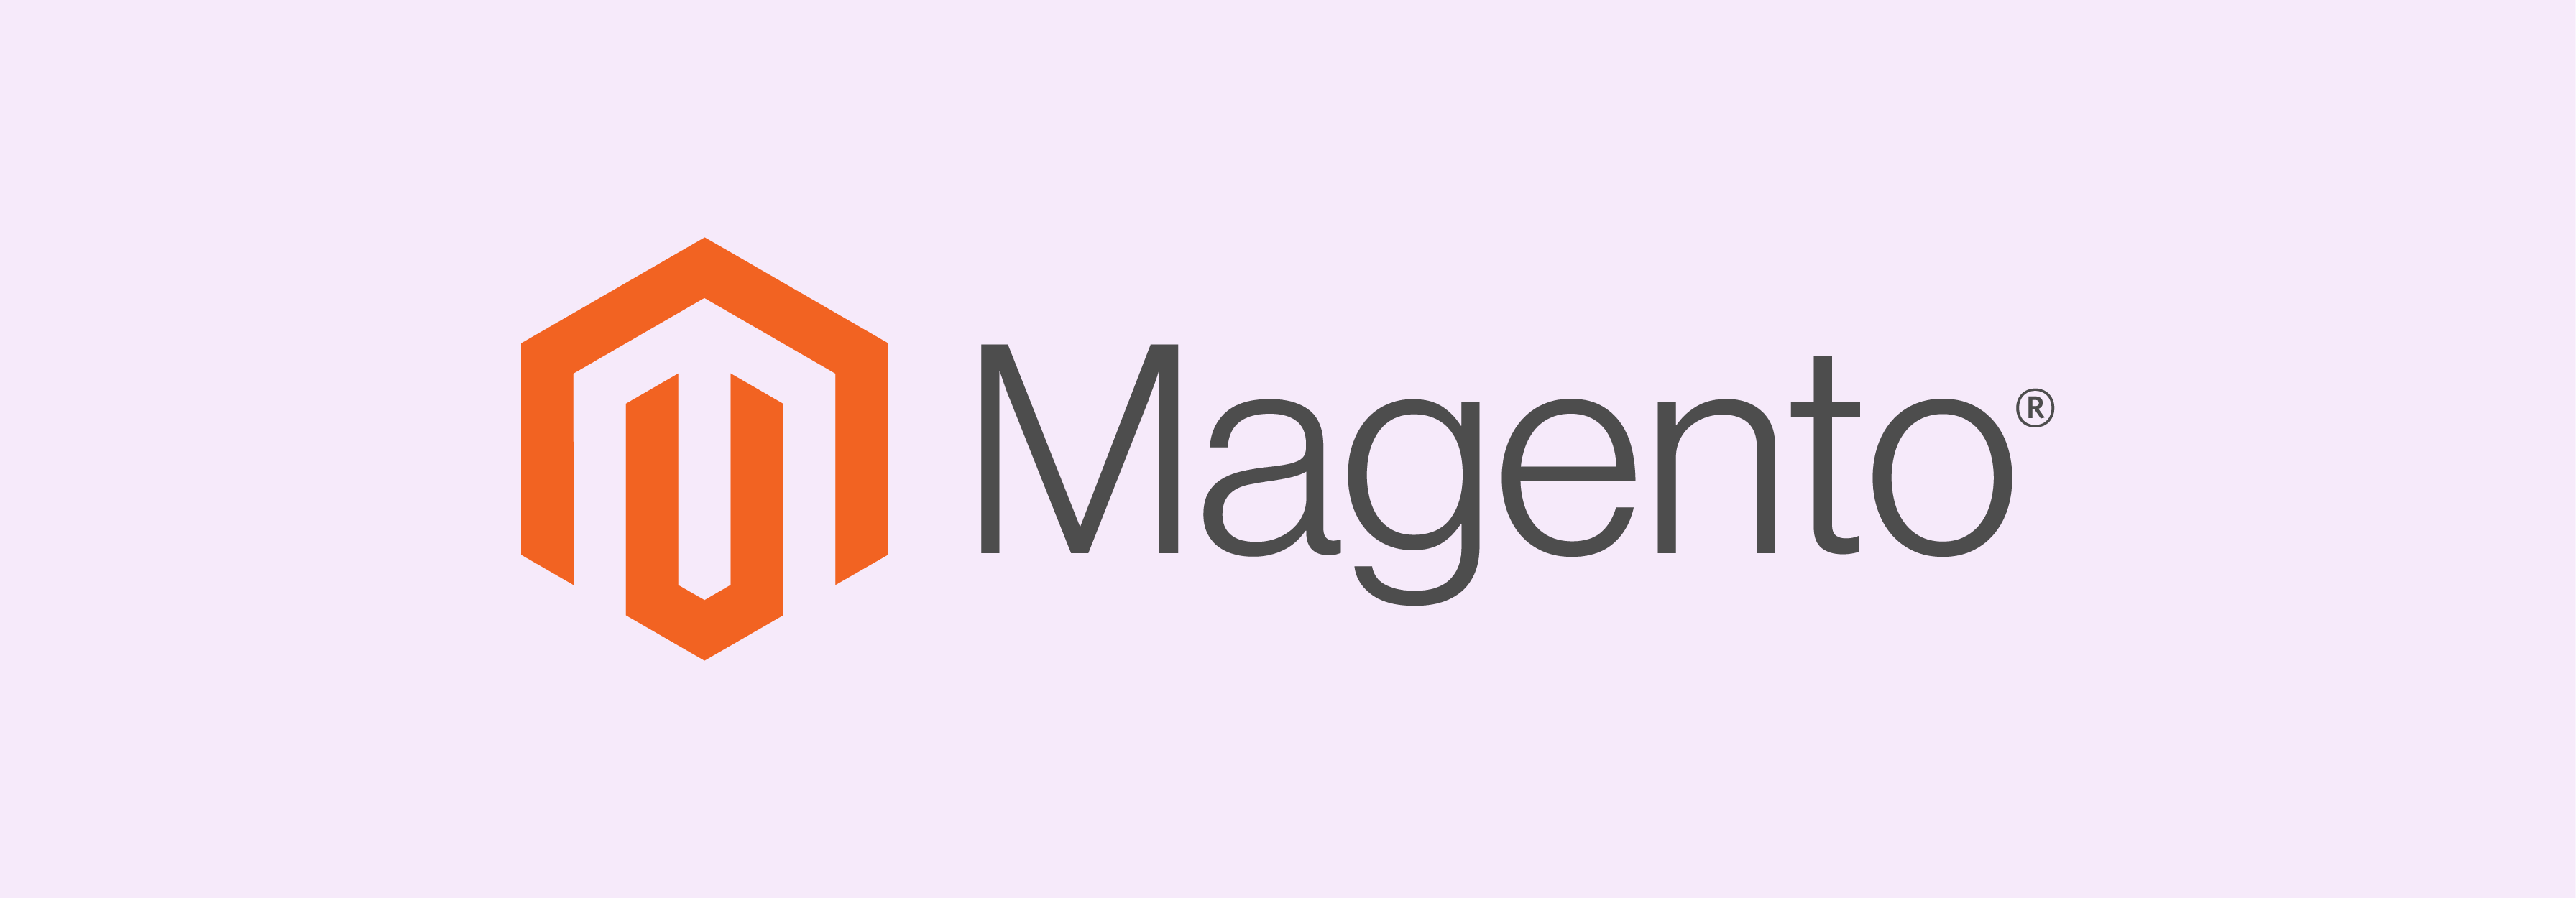 Overview of Magento 2's operational framework and architecture